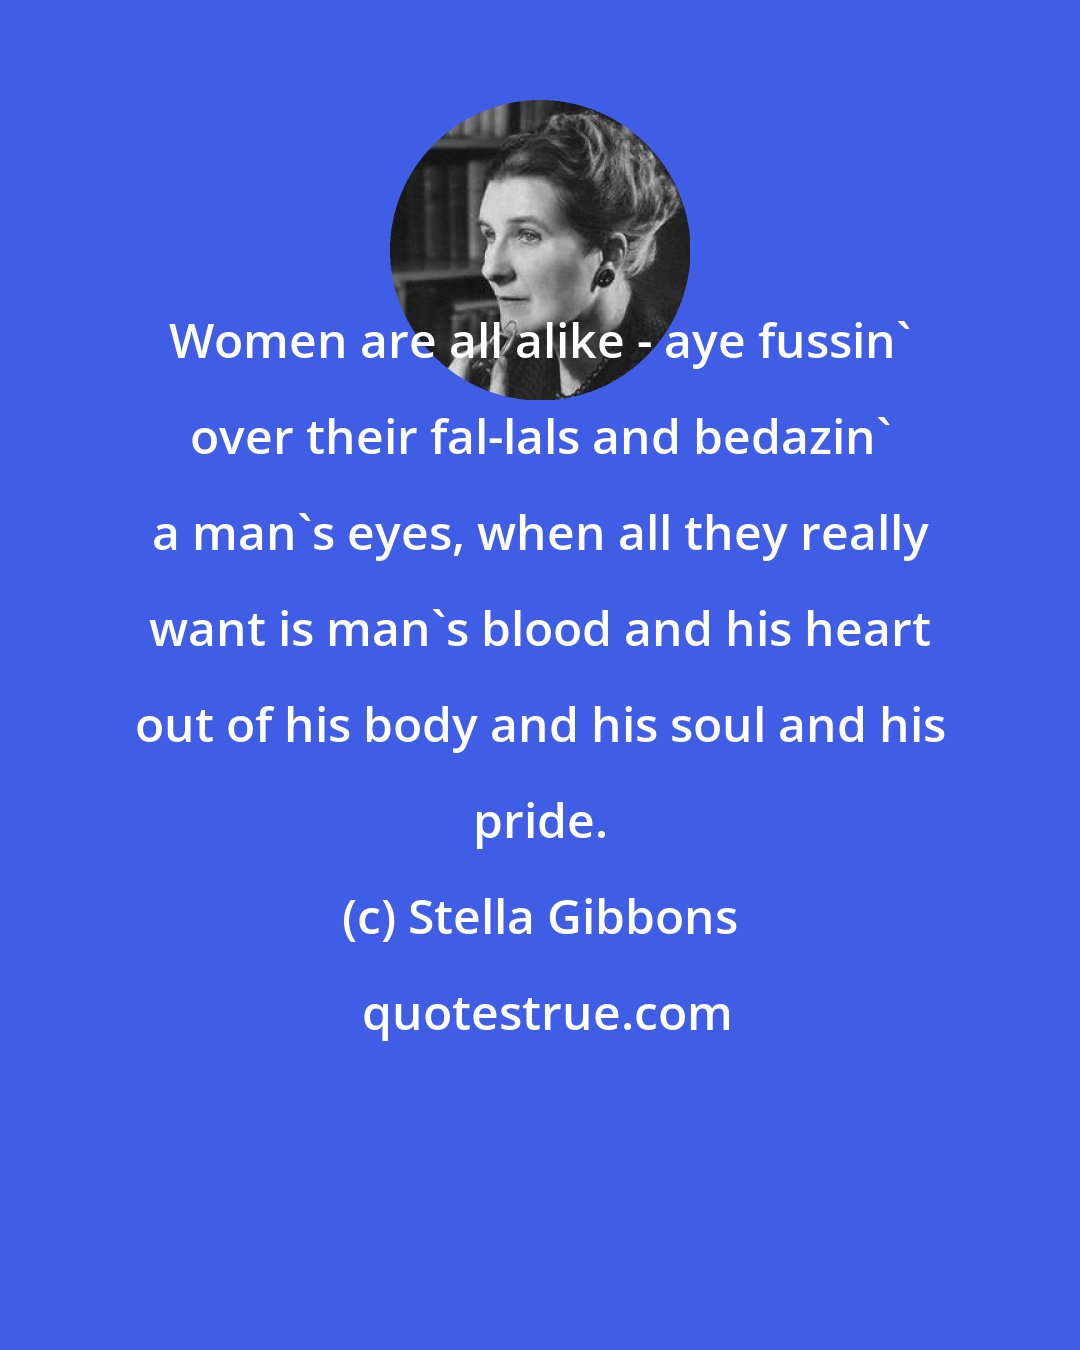 Stella Gibbons: Women are all alike - aye fussin' over their fal-lals and bedazin' a man's eyes, when all they really want is man's blood and his heart out of his body and his soul and his pride.